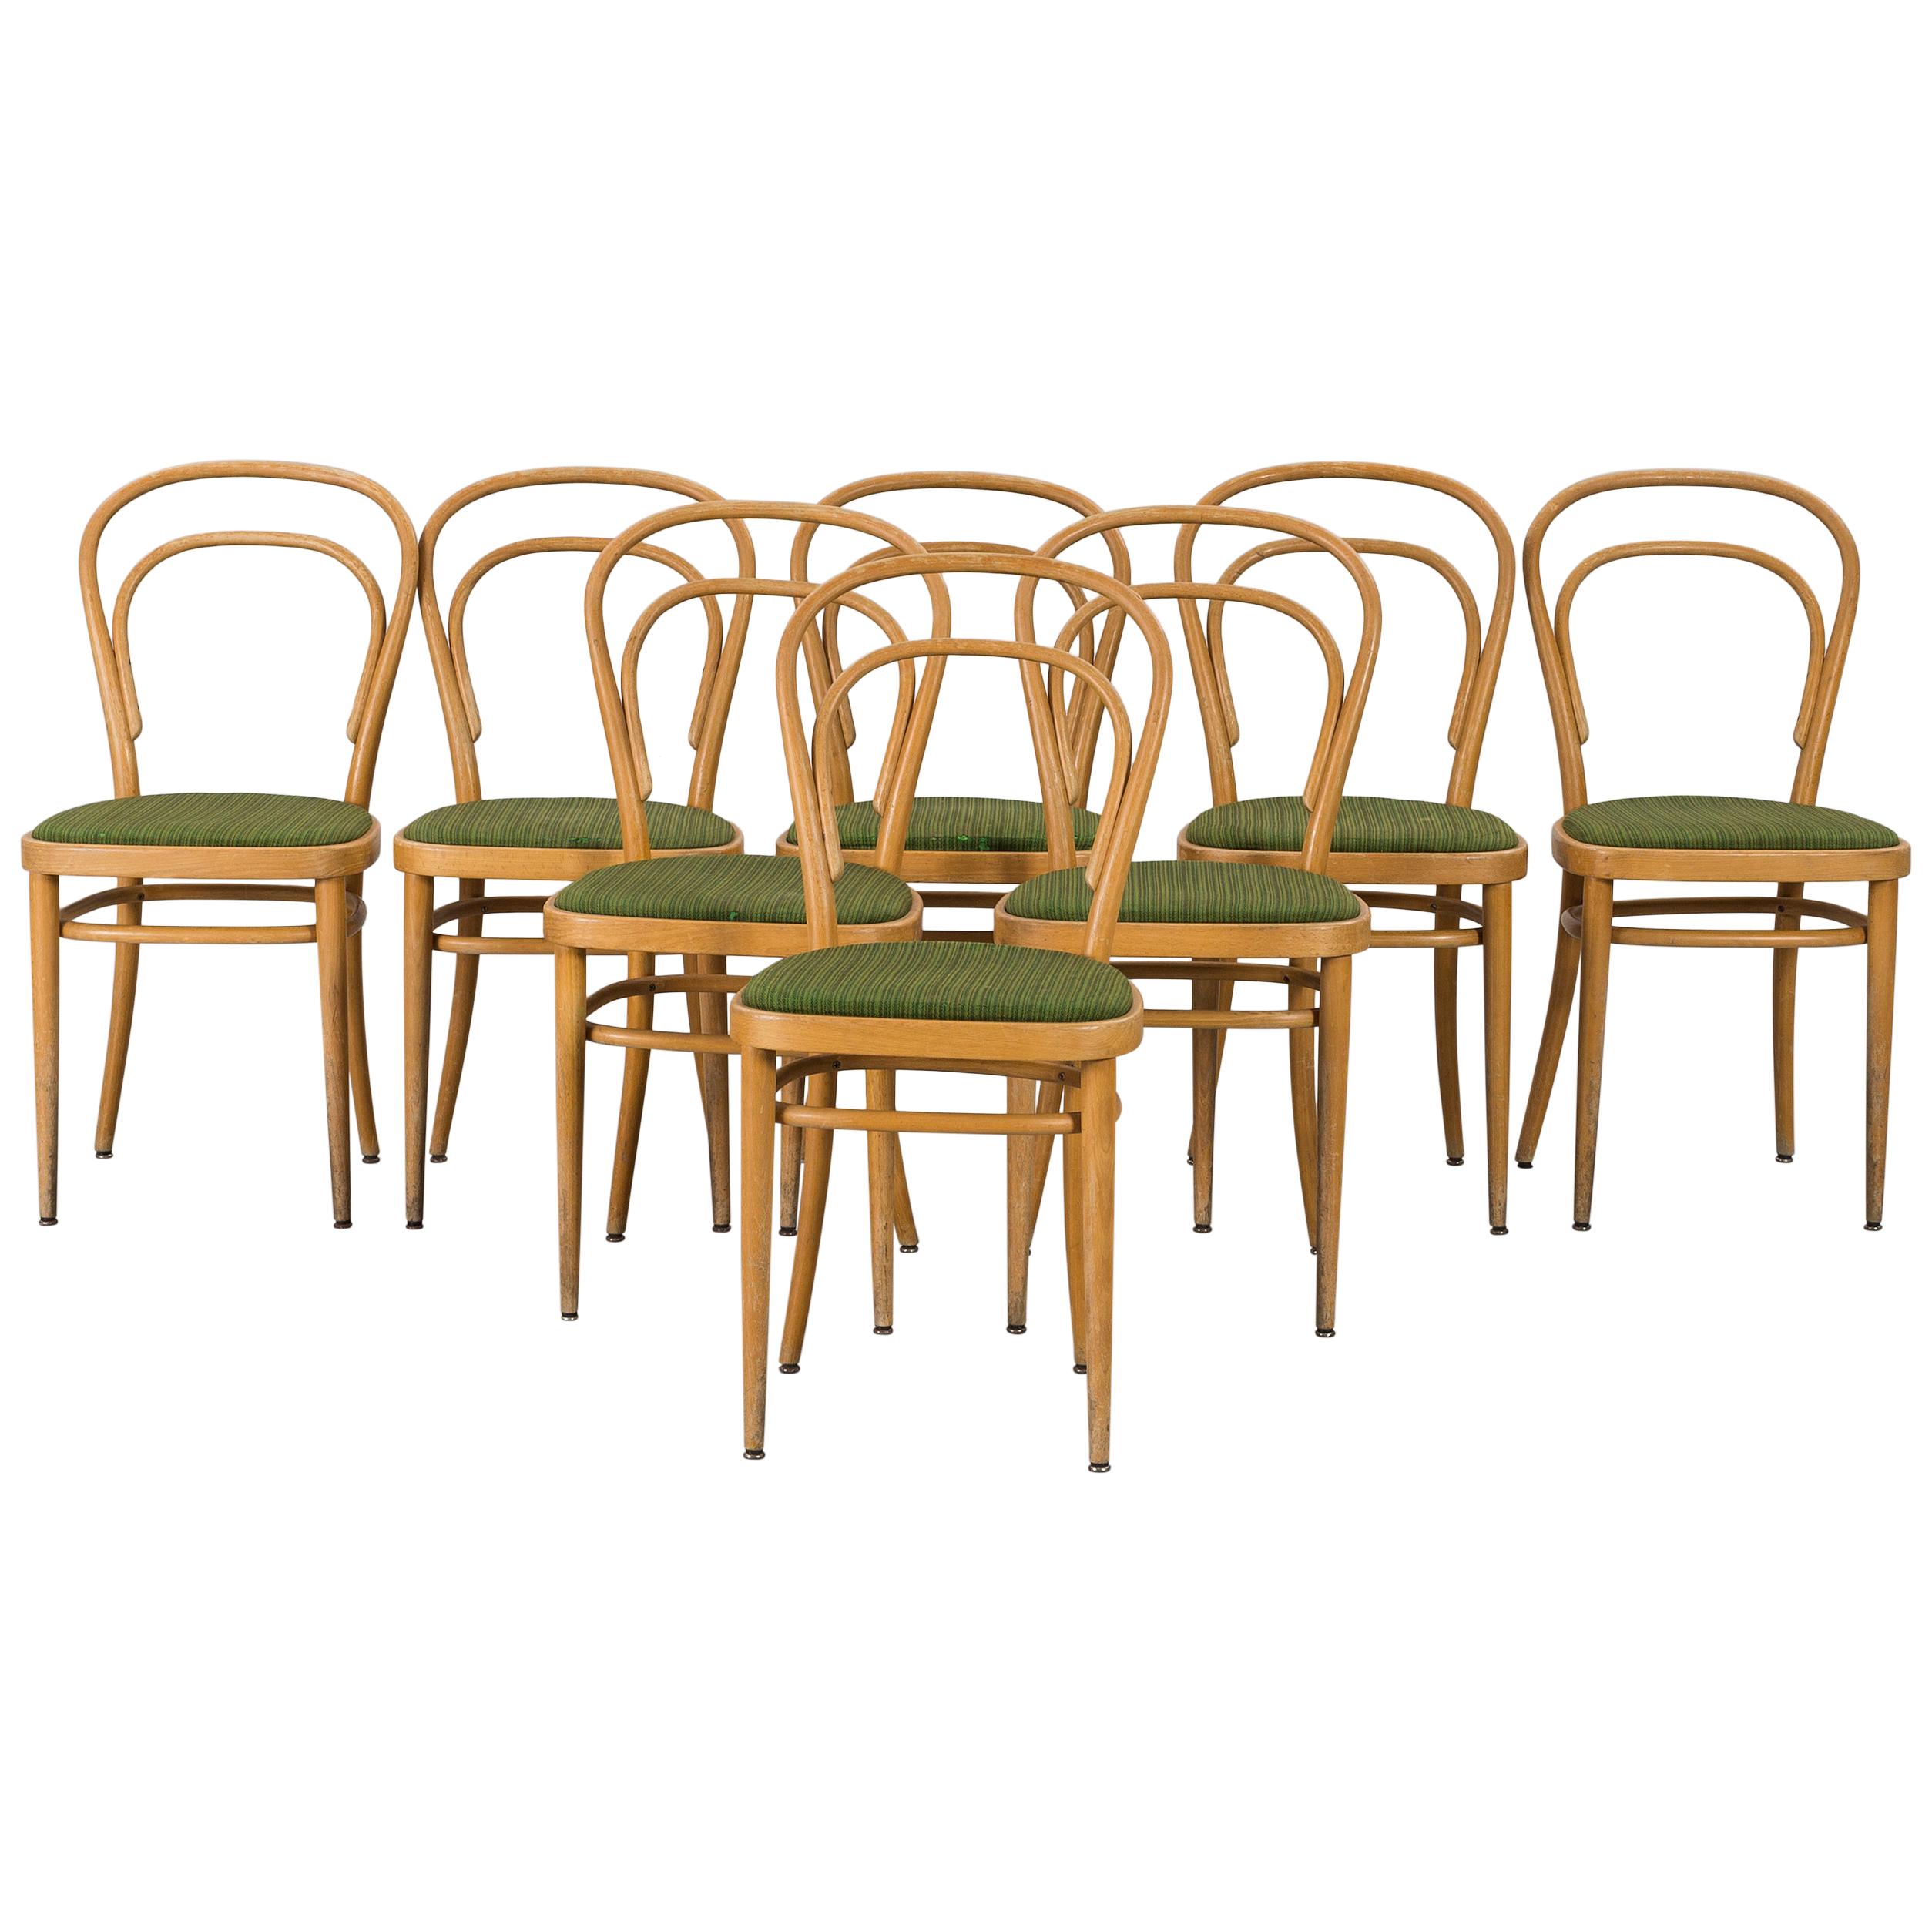 Thonet Beech Bentwood Chairs, Made in Mid-20th Century, Set of 8